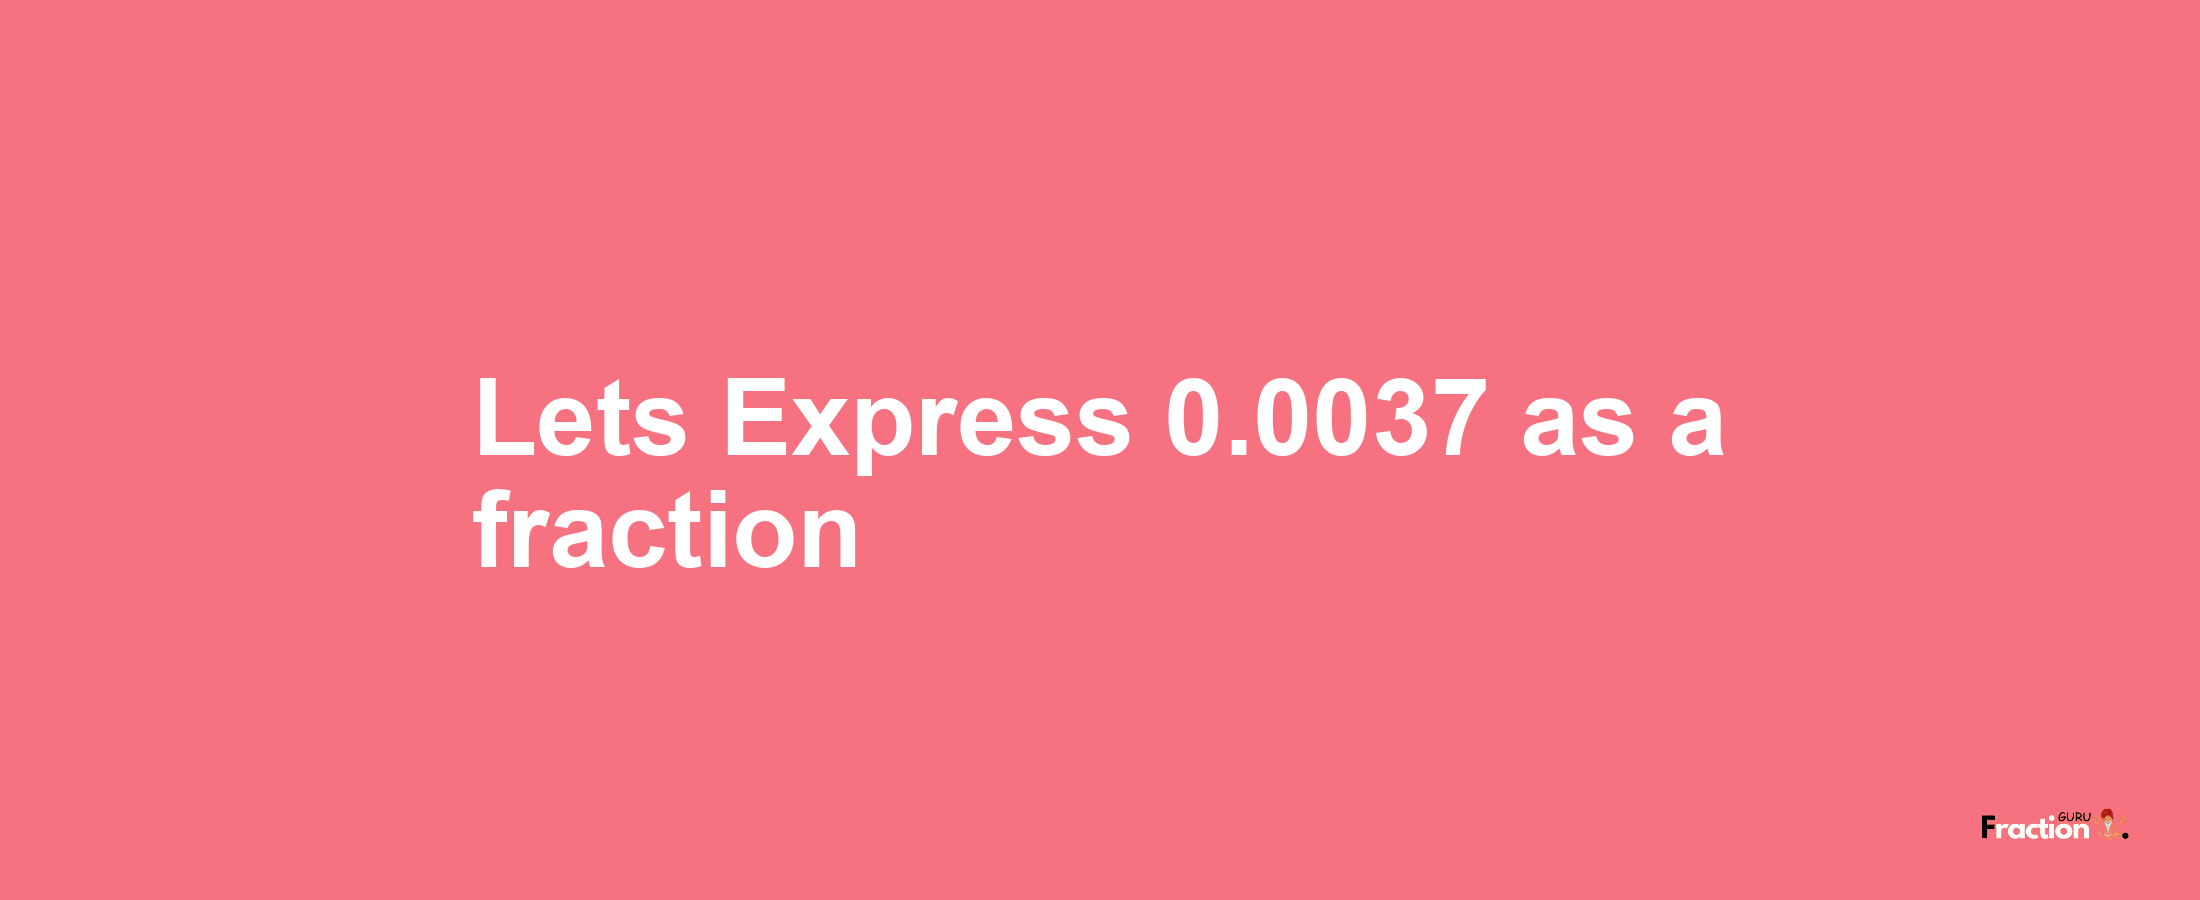 Lets Express 0.0037 as afraction